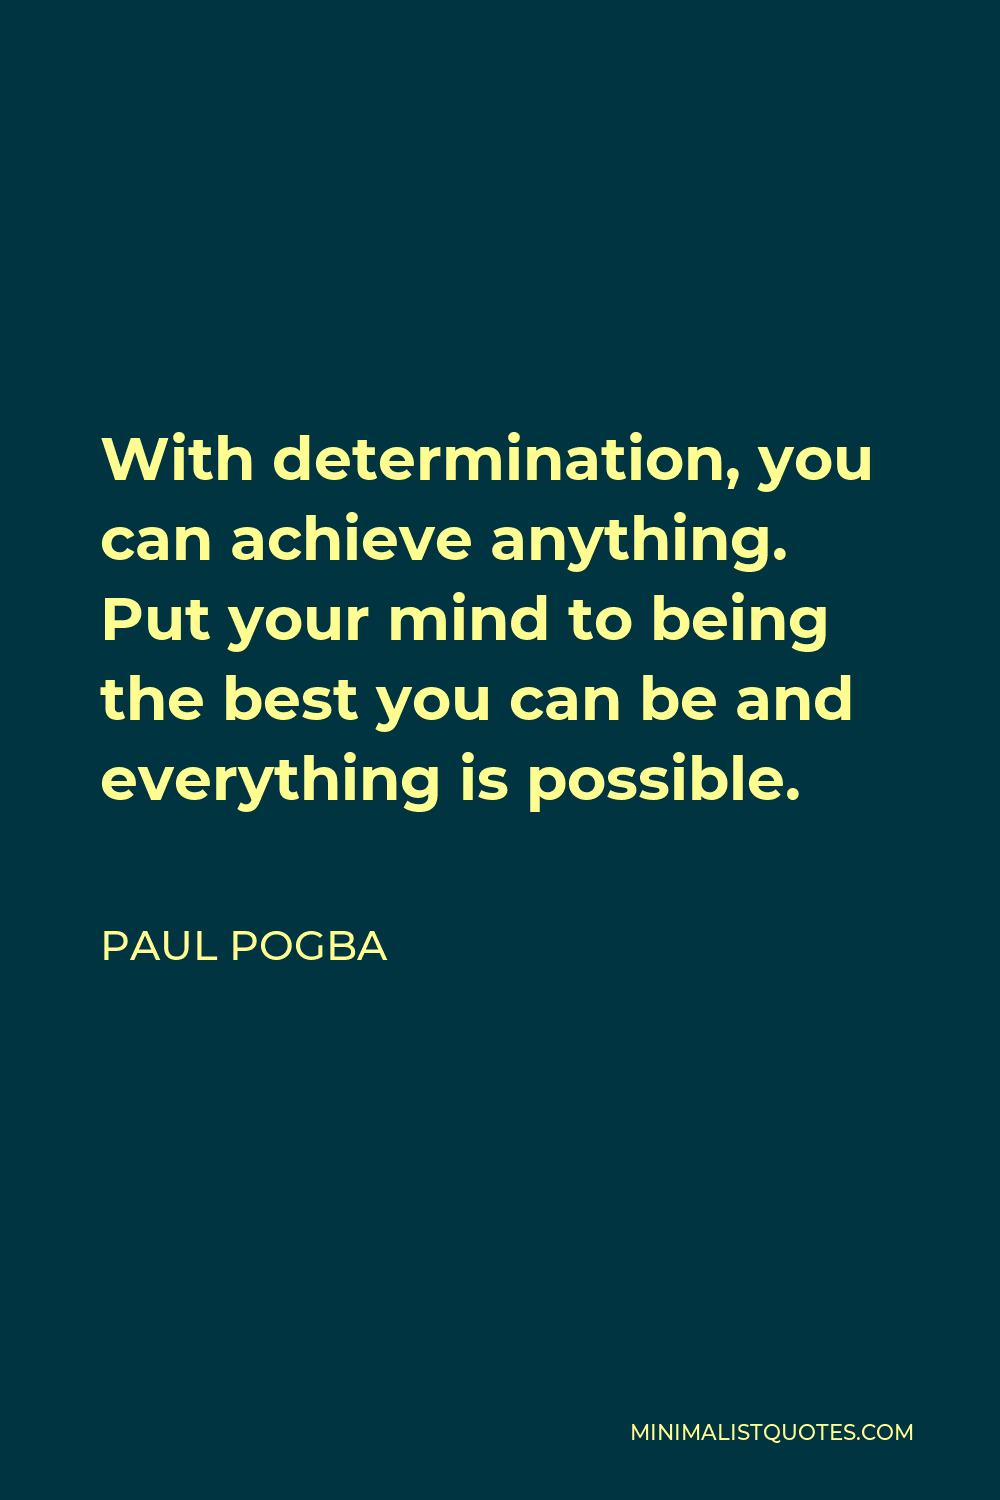 Paul Pogba Quote - With determination, you can achieve anything. Put your mind to being the best you can be and everything is possible.